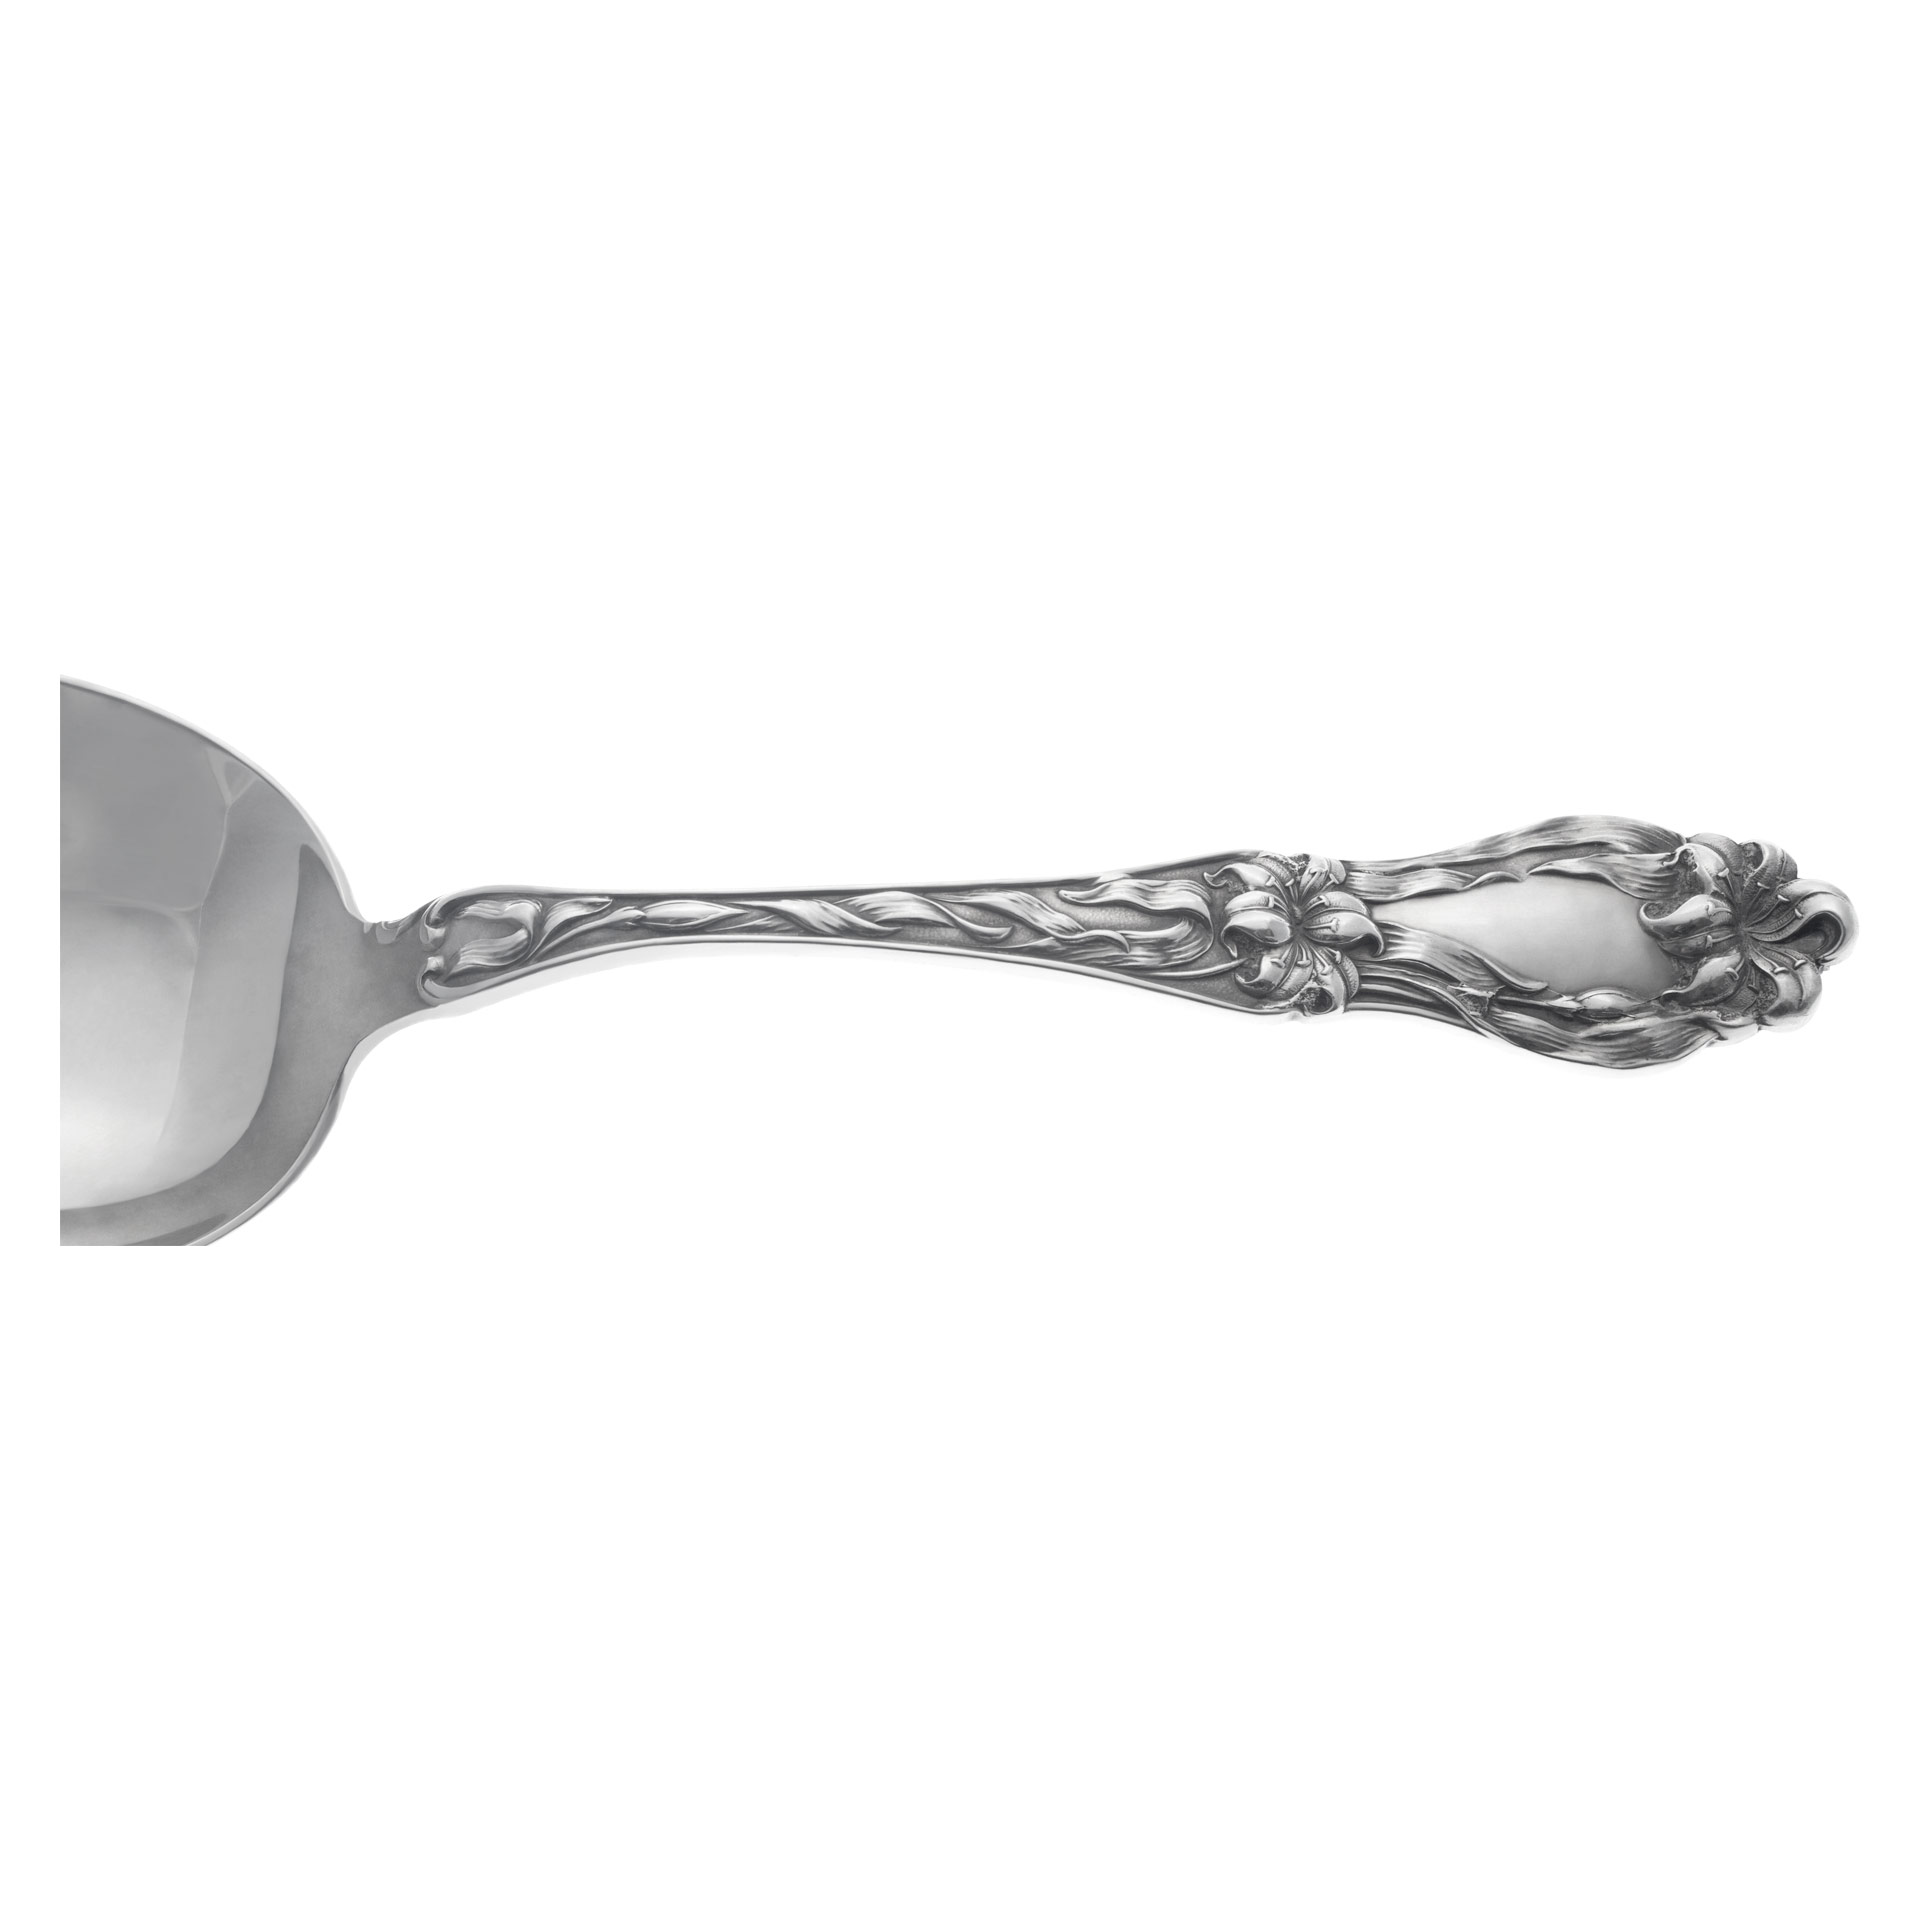 Lily by Frank Whiting Sterling Silver Serving Spoon 8 1/4"